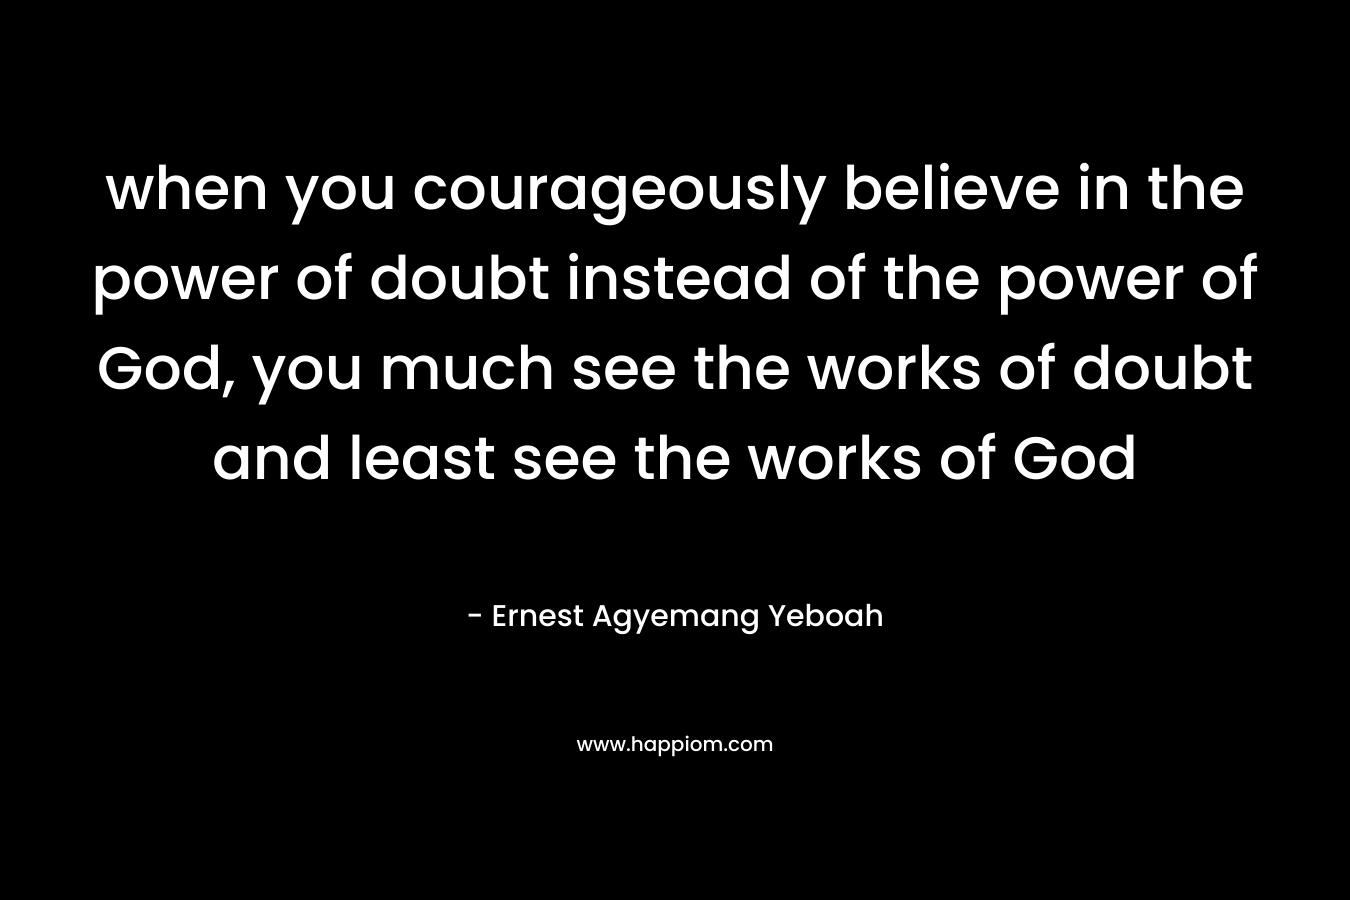 when you courageously believe in the power of doubt instead of the power of God, you much see the works of doubt and least see the works of God